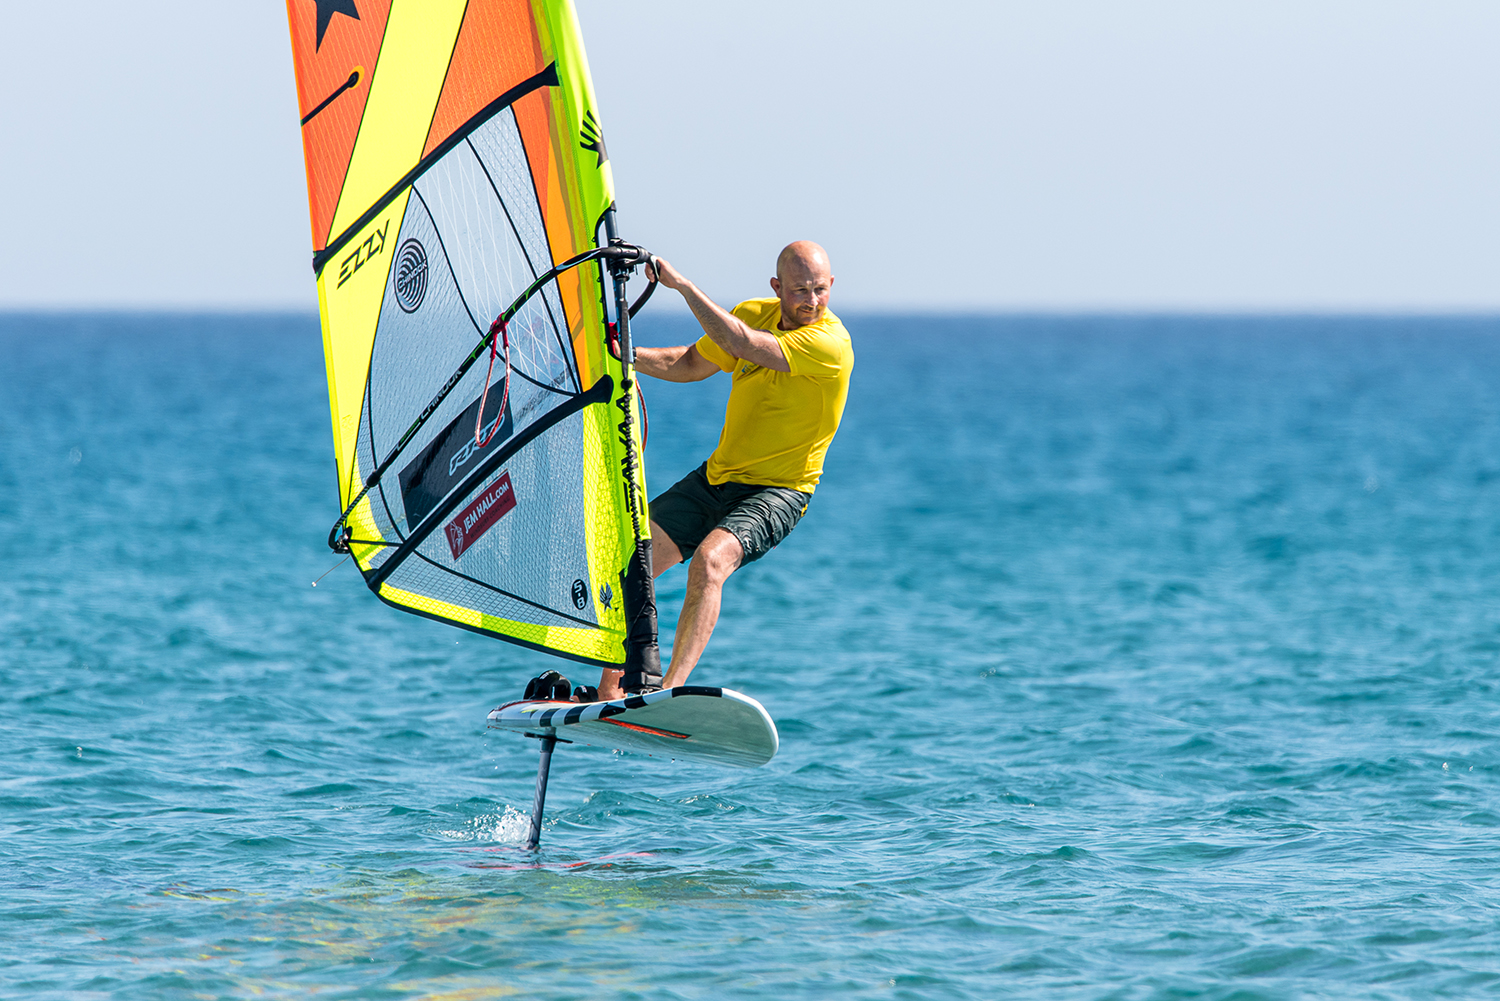 Foiling into tacks are fun and a great skill builder; rake the rig back, as the hips swing forward, carve into the wind, and keep that nose up as far as you can.